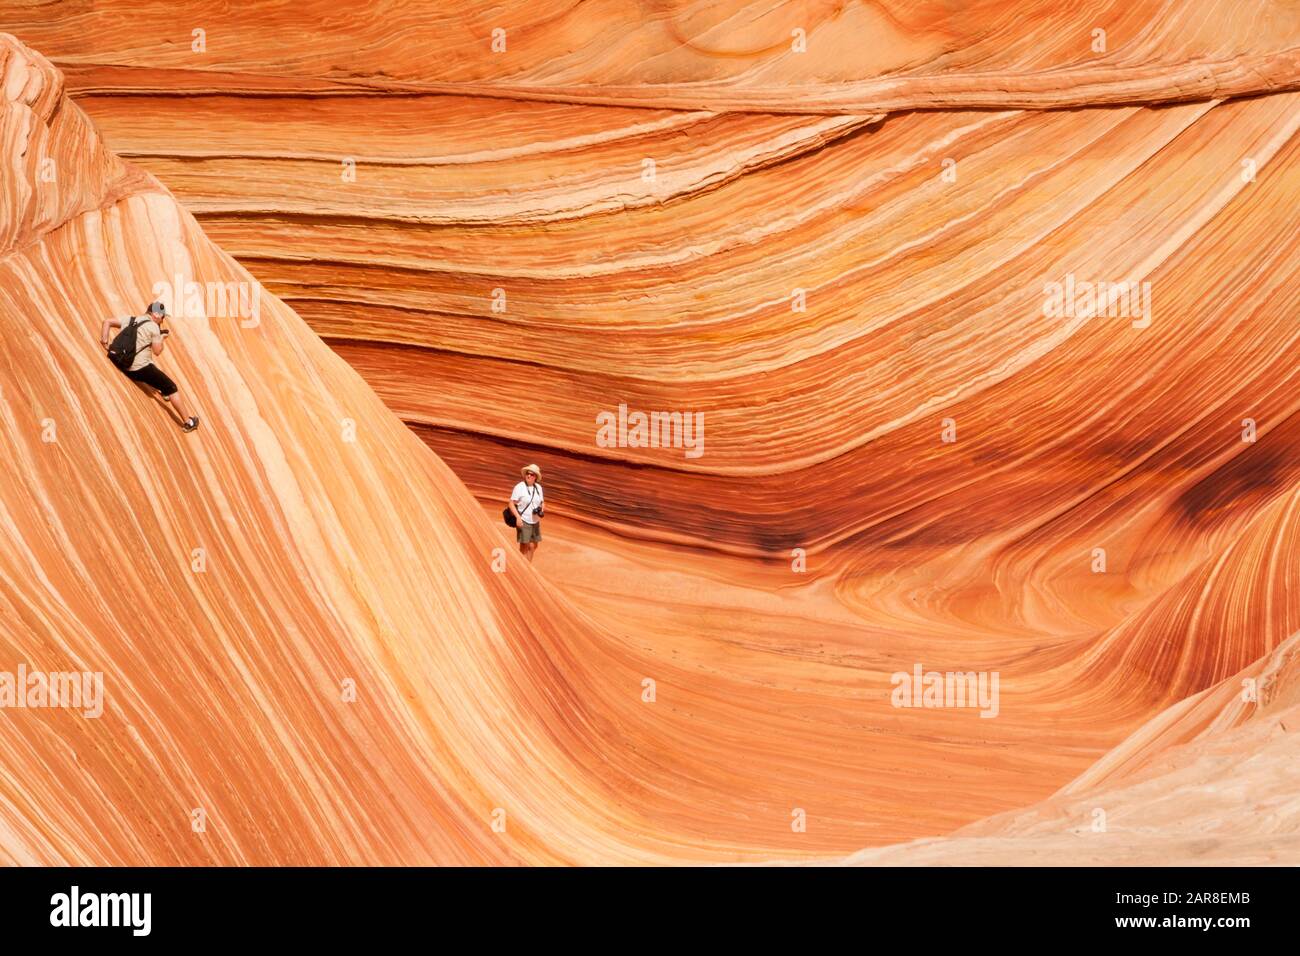 Two people explore the striking geologic rock formations at the WAVE in north Coyote Butte, Page, Arizona Stock Photo